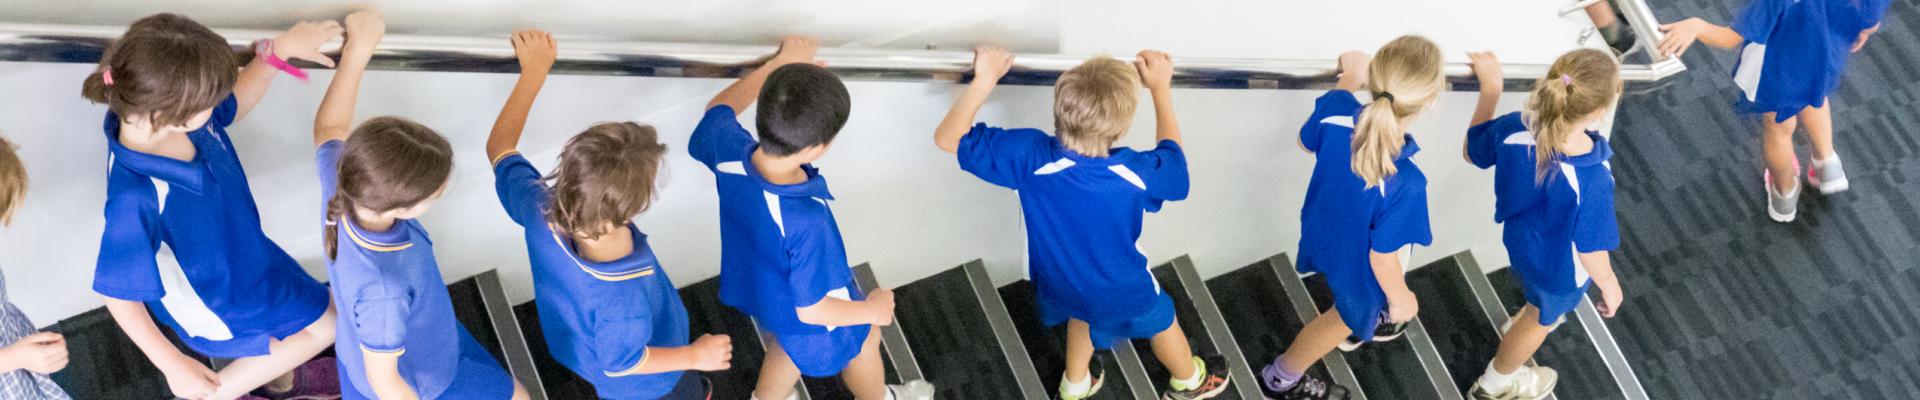 School group on stairwell